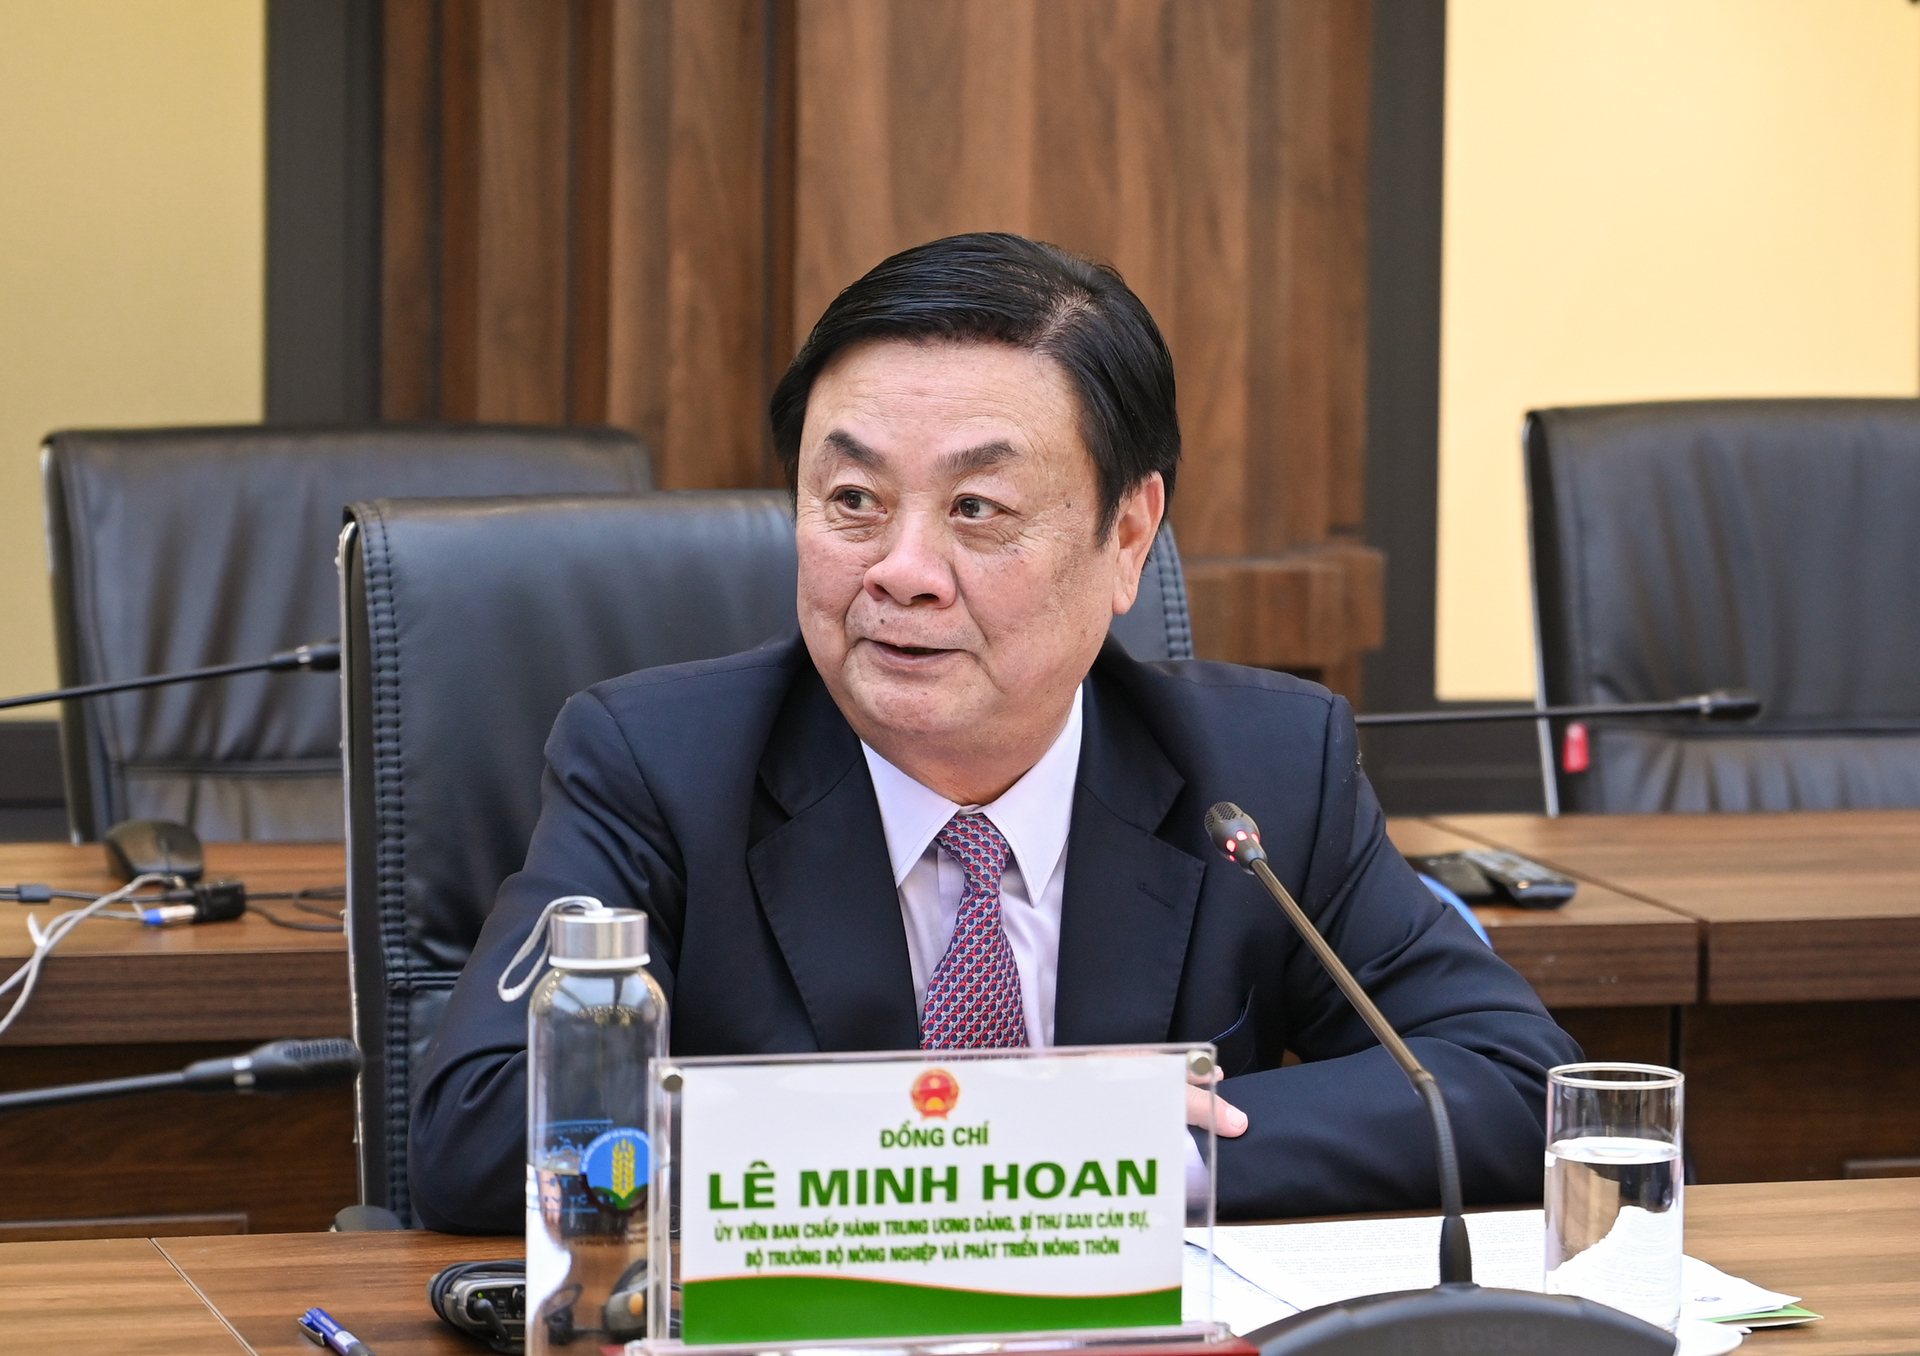 Minister Le Minh Hoan discusses with the Green Transformation Partner Alliance on July 25. Photo: Quynh Chi.